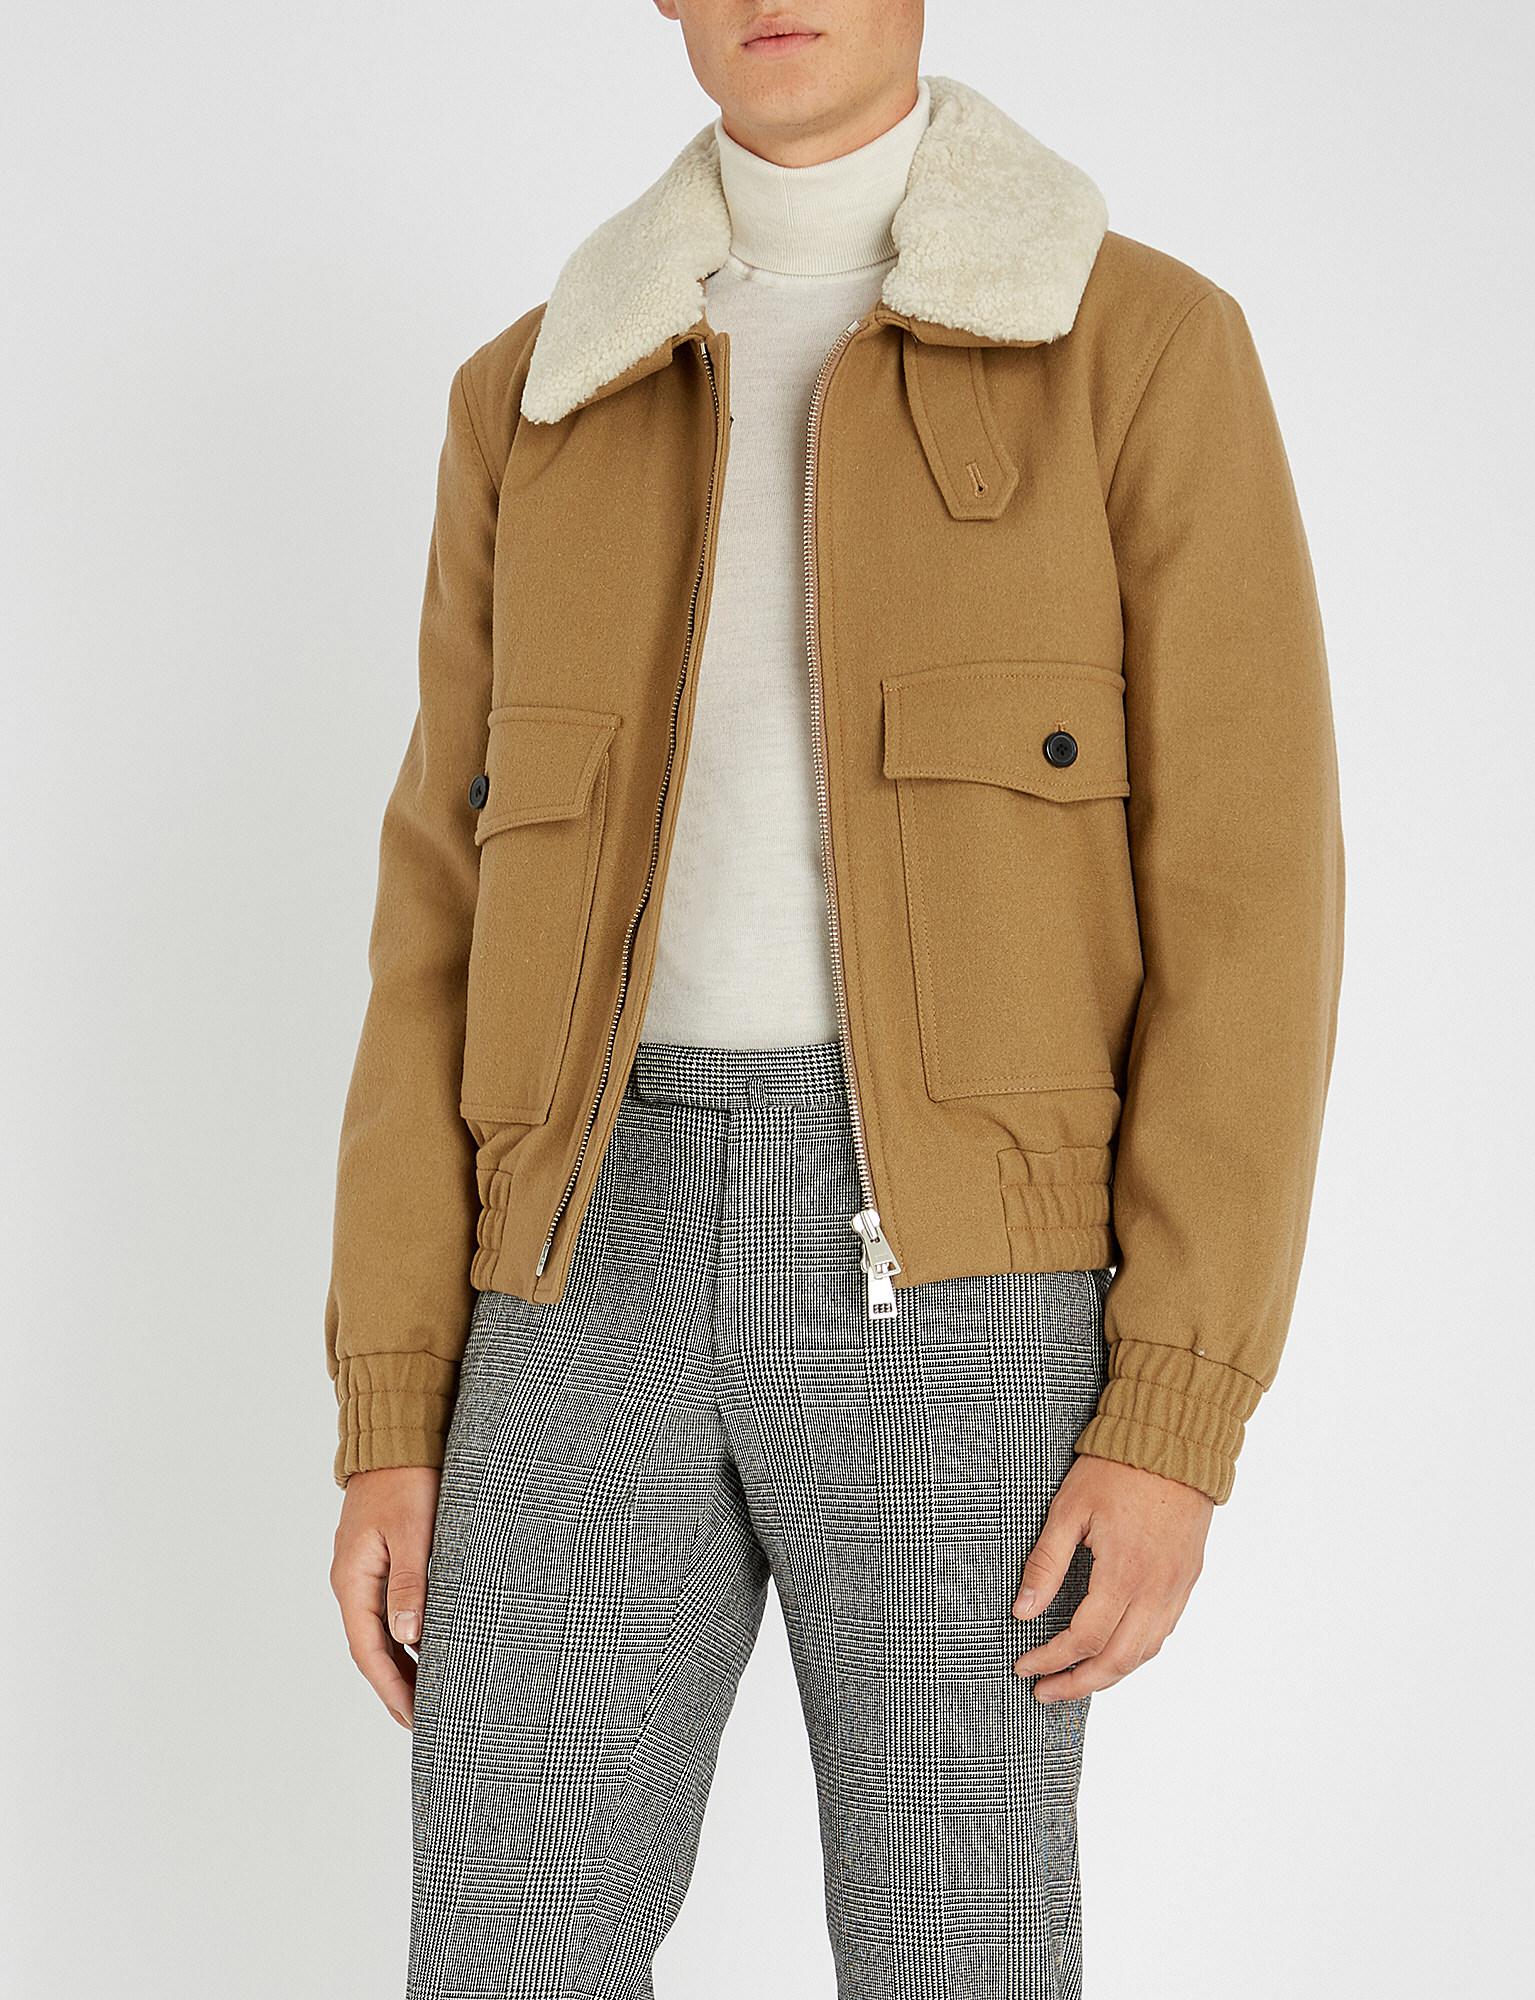 AMI Shearling Collar Wool-blend Jacket in Natural for Men - Lyst